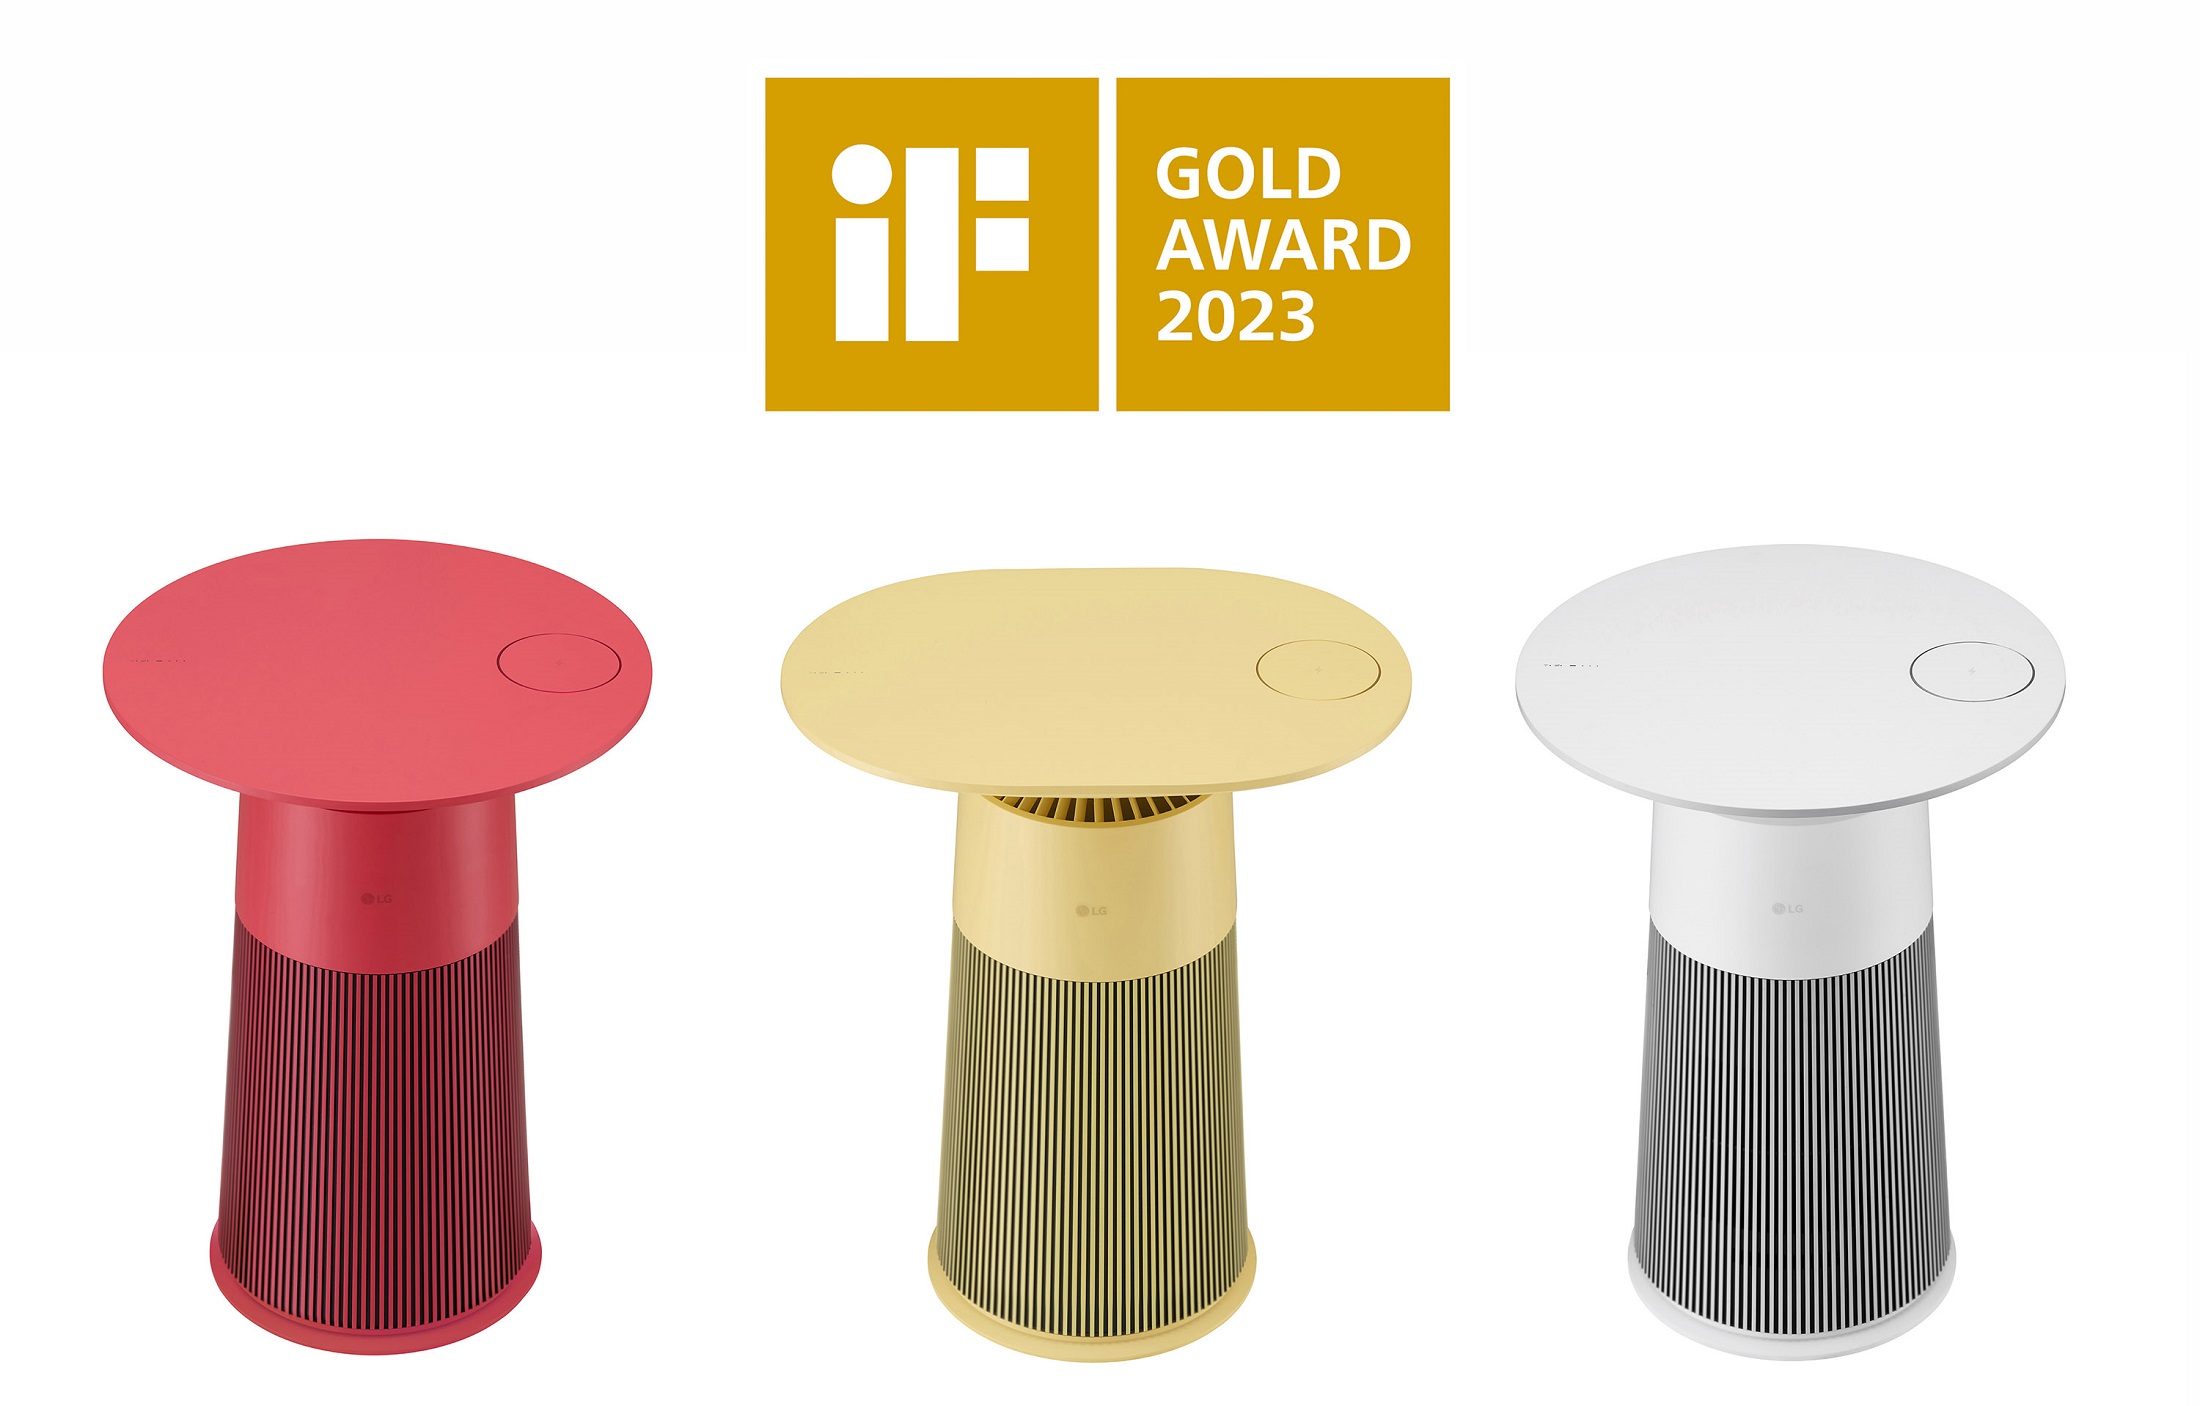 LG Aero Furniture in three different colors with iF Design Award's Gold Award 2023 logo on the top